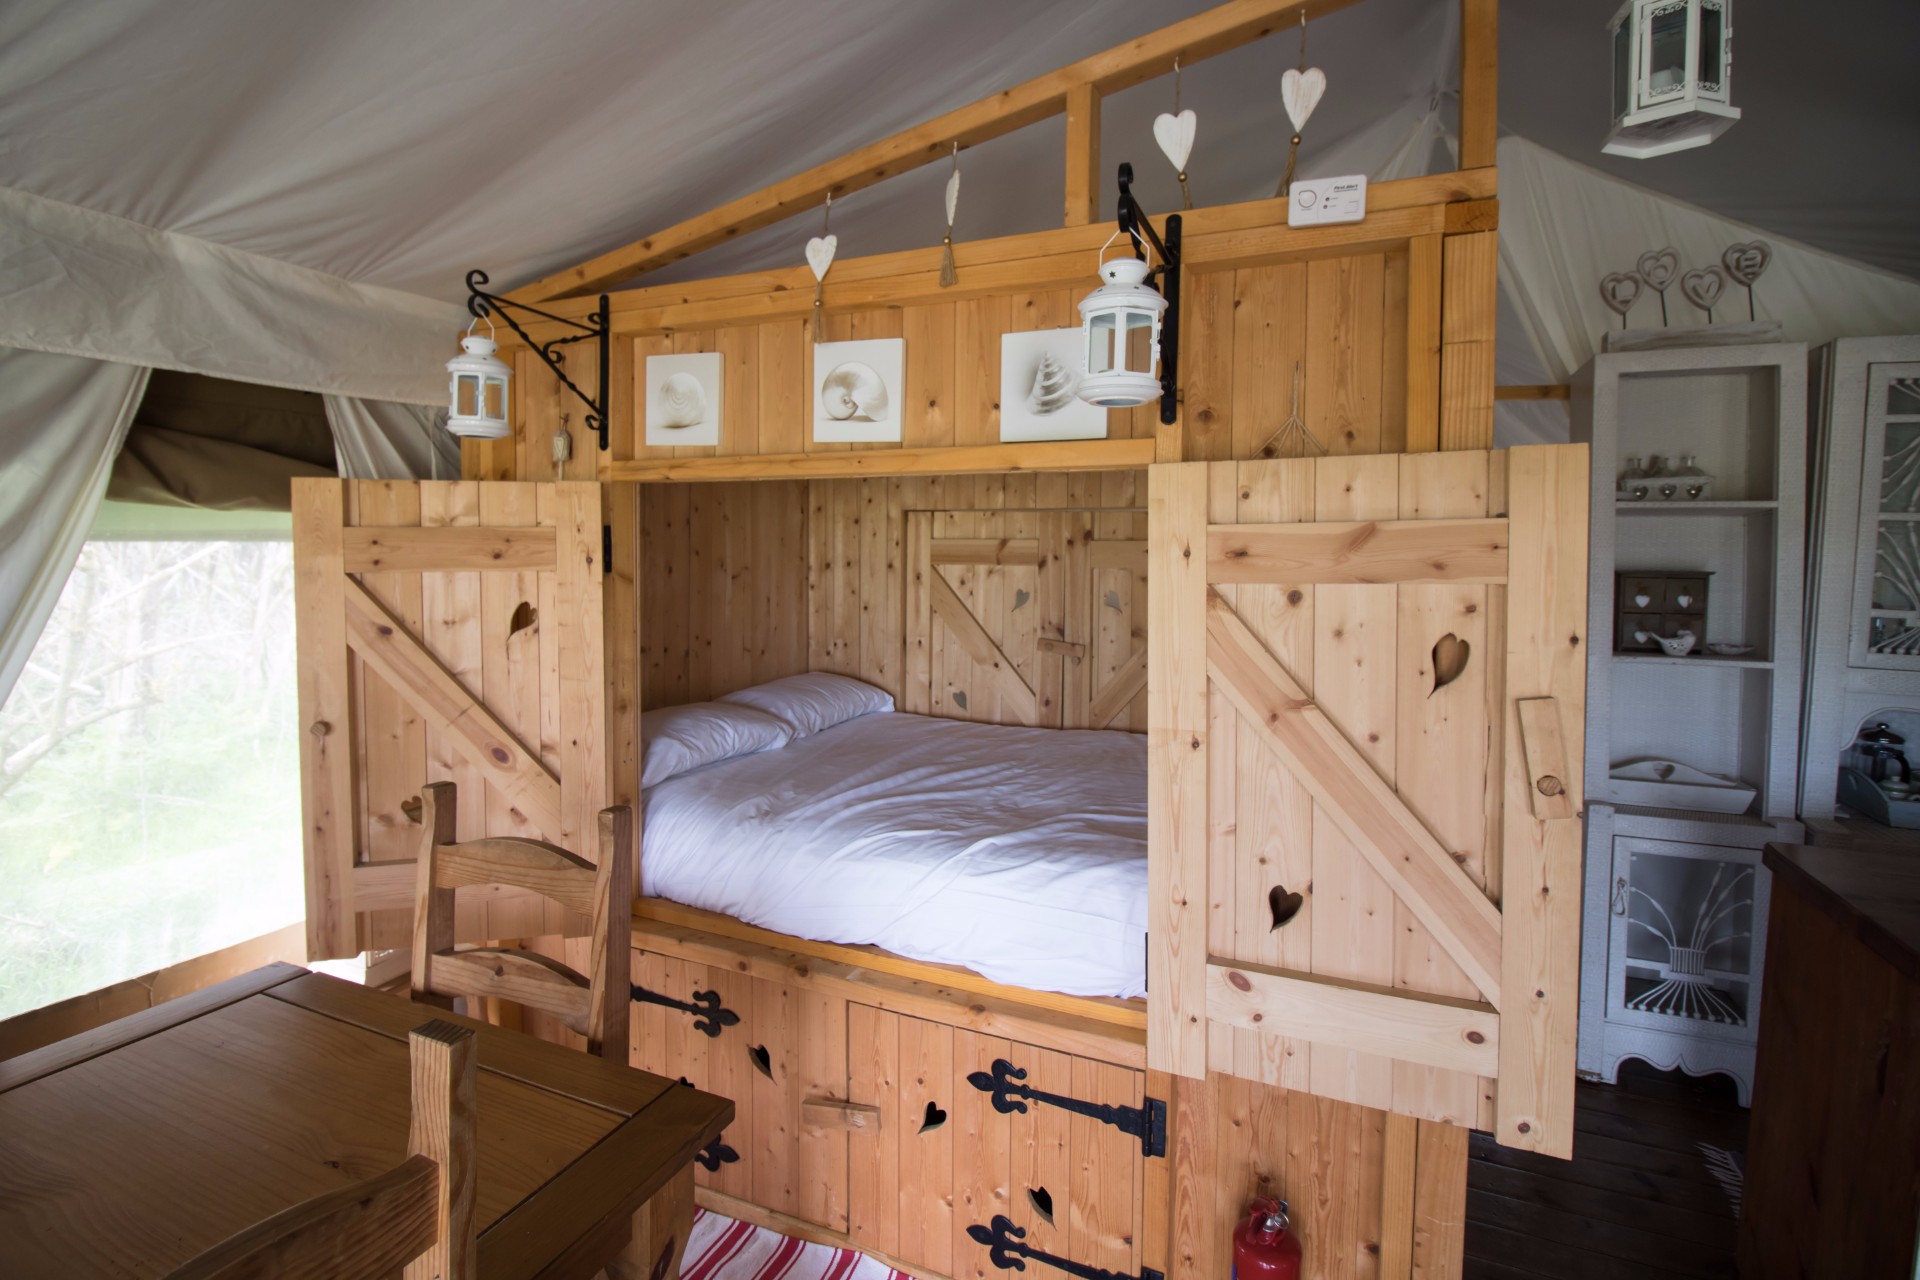 Sleeping in a Safari Tent at Harvest Moon Holidays near North Berwick, East Lothian, Scotland, UK. This luxurious glamping site, located on a gorgeous private beach, is home to seven large safari tents and seven fabulous treehouses. If quirky and unusual accommodation is your jam then you will love this glamping site. Each safari tent is kitted out with two bedrooms and a cosy cupboard bed, a lounge and dining room, a kitchen and an ensuite WC and hot shower! Click through to read more...